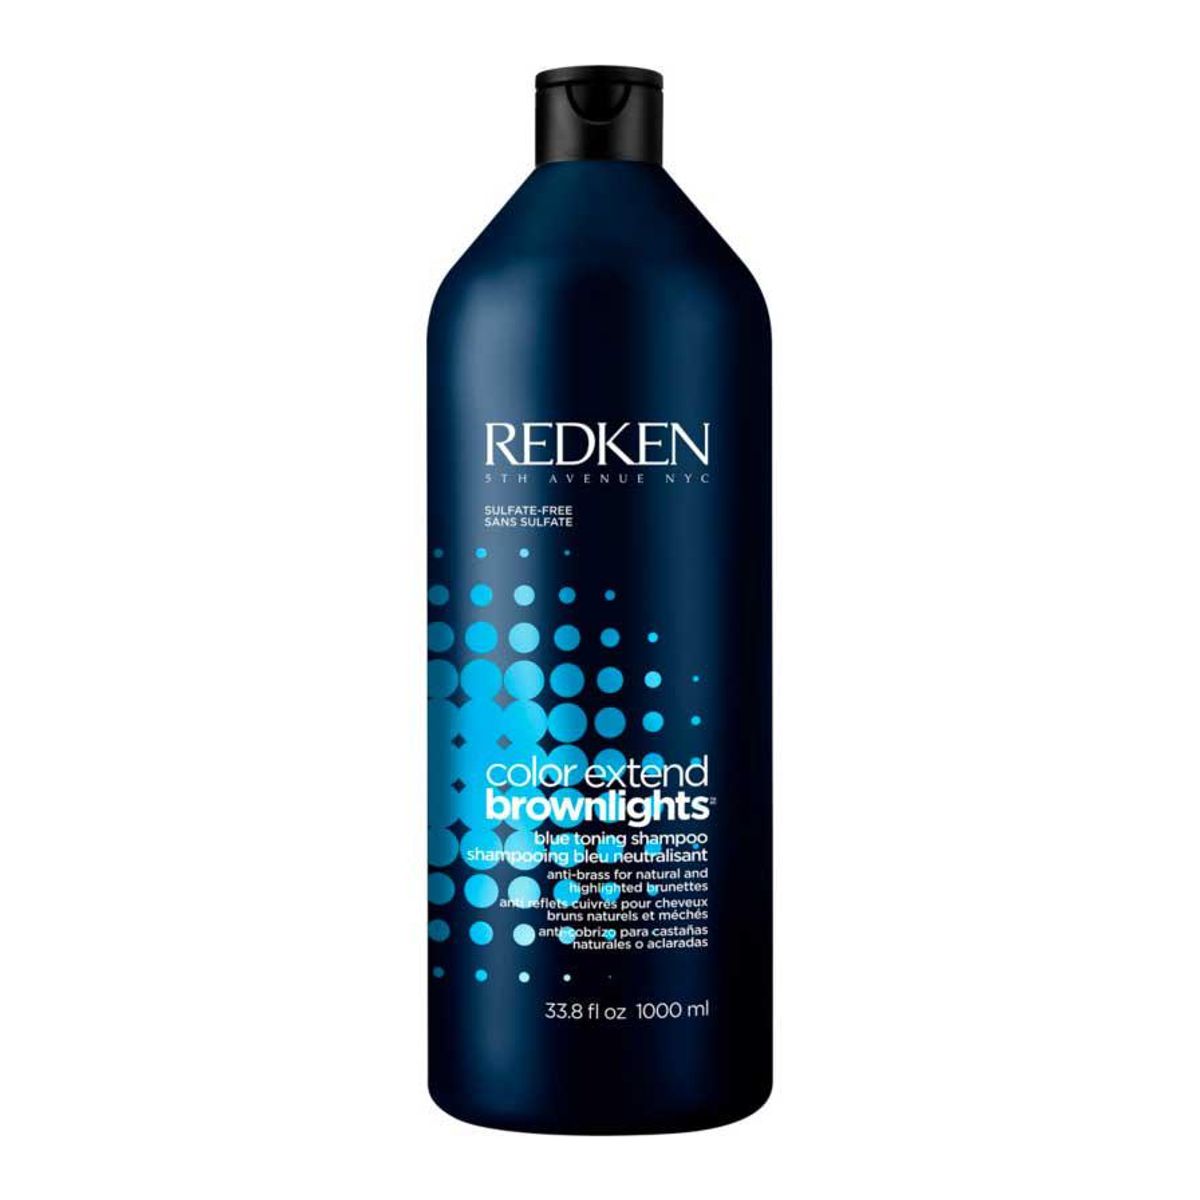 redken color extend brownlights blue toning sulfate free shampoo